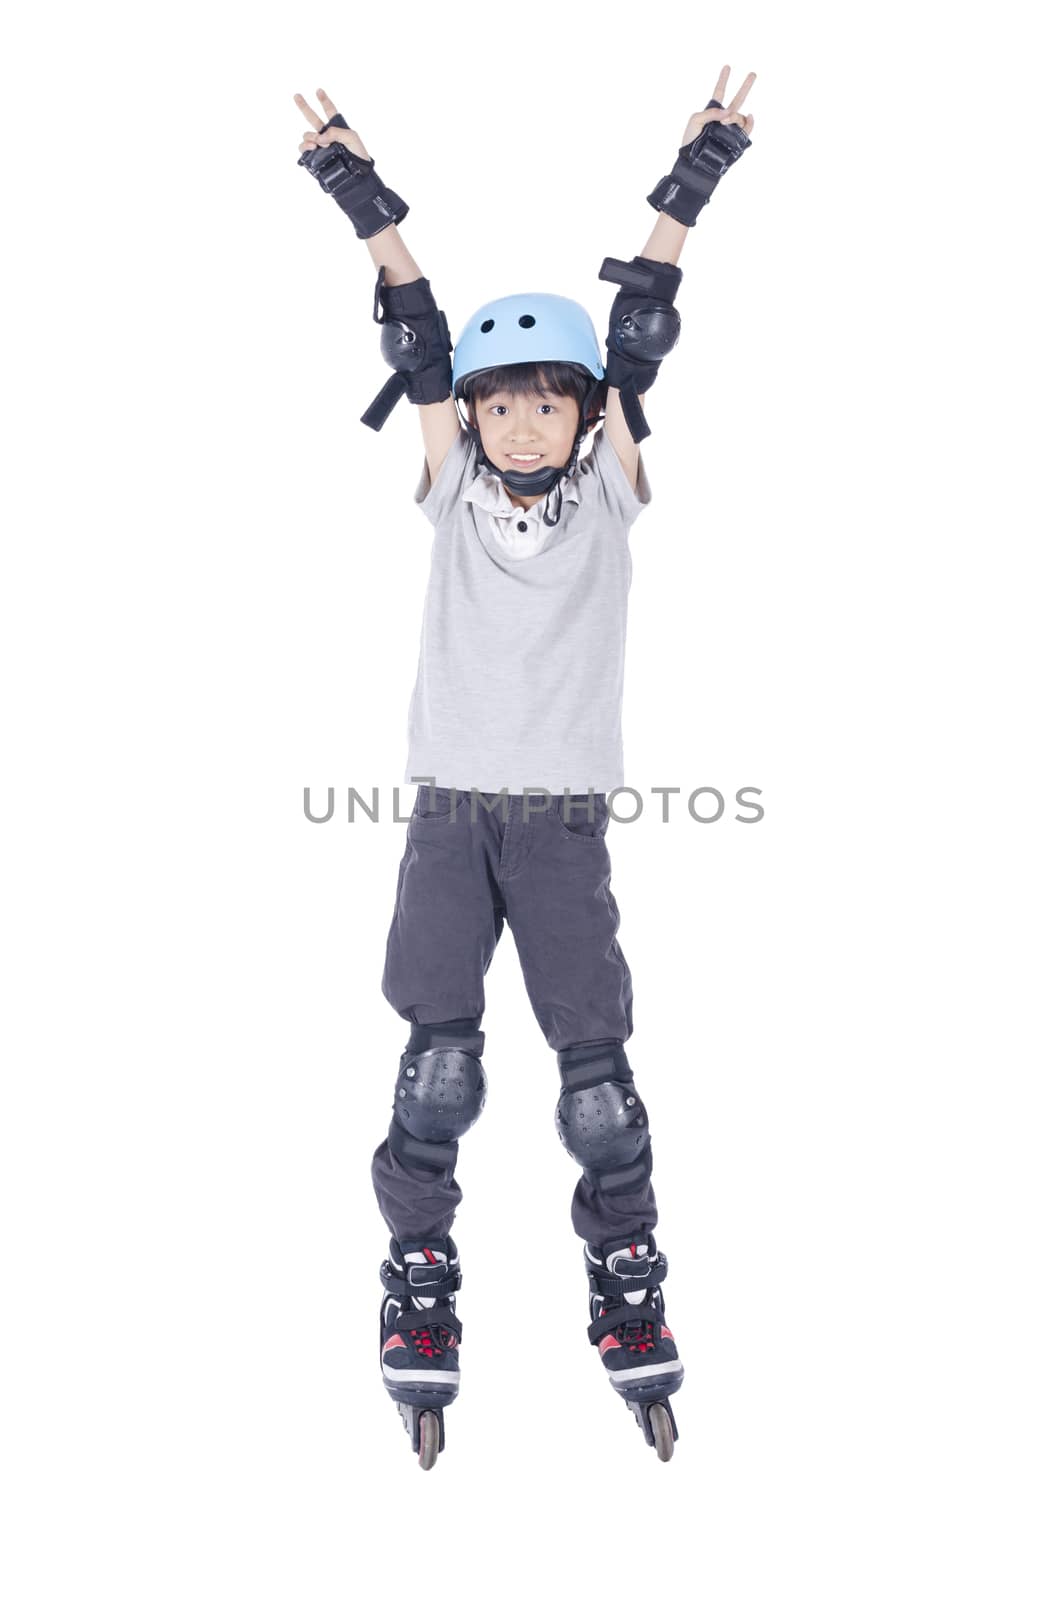 Smart boy playing roller blades over white background